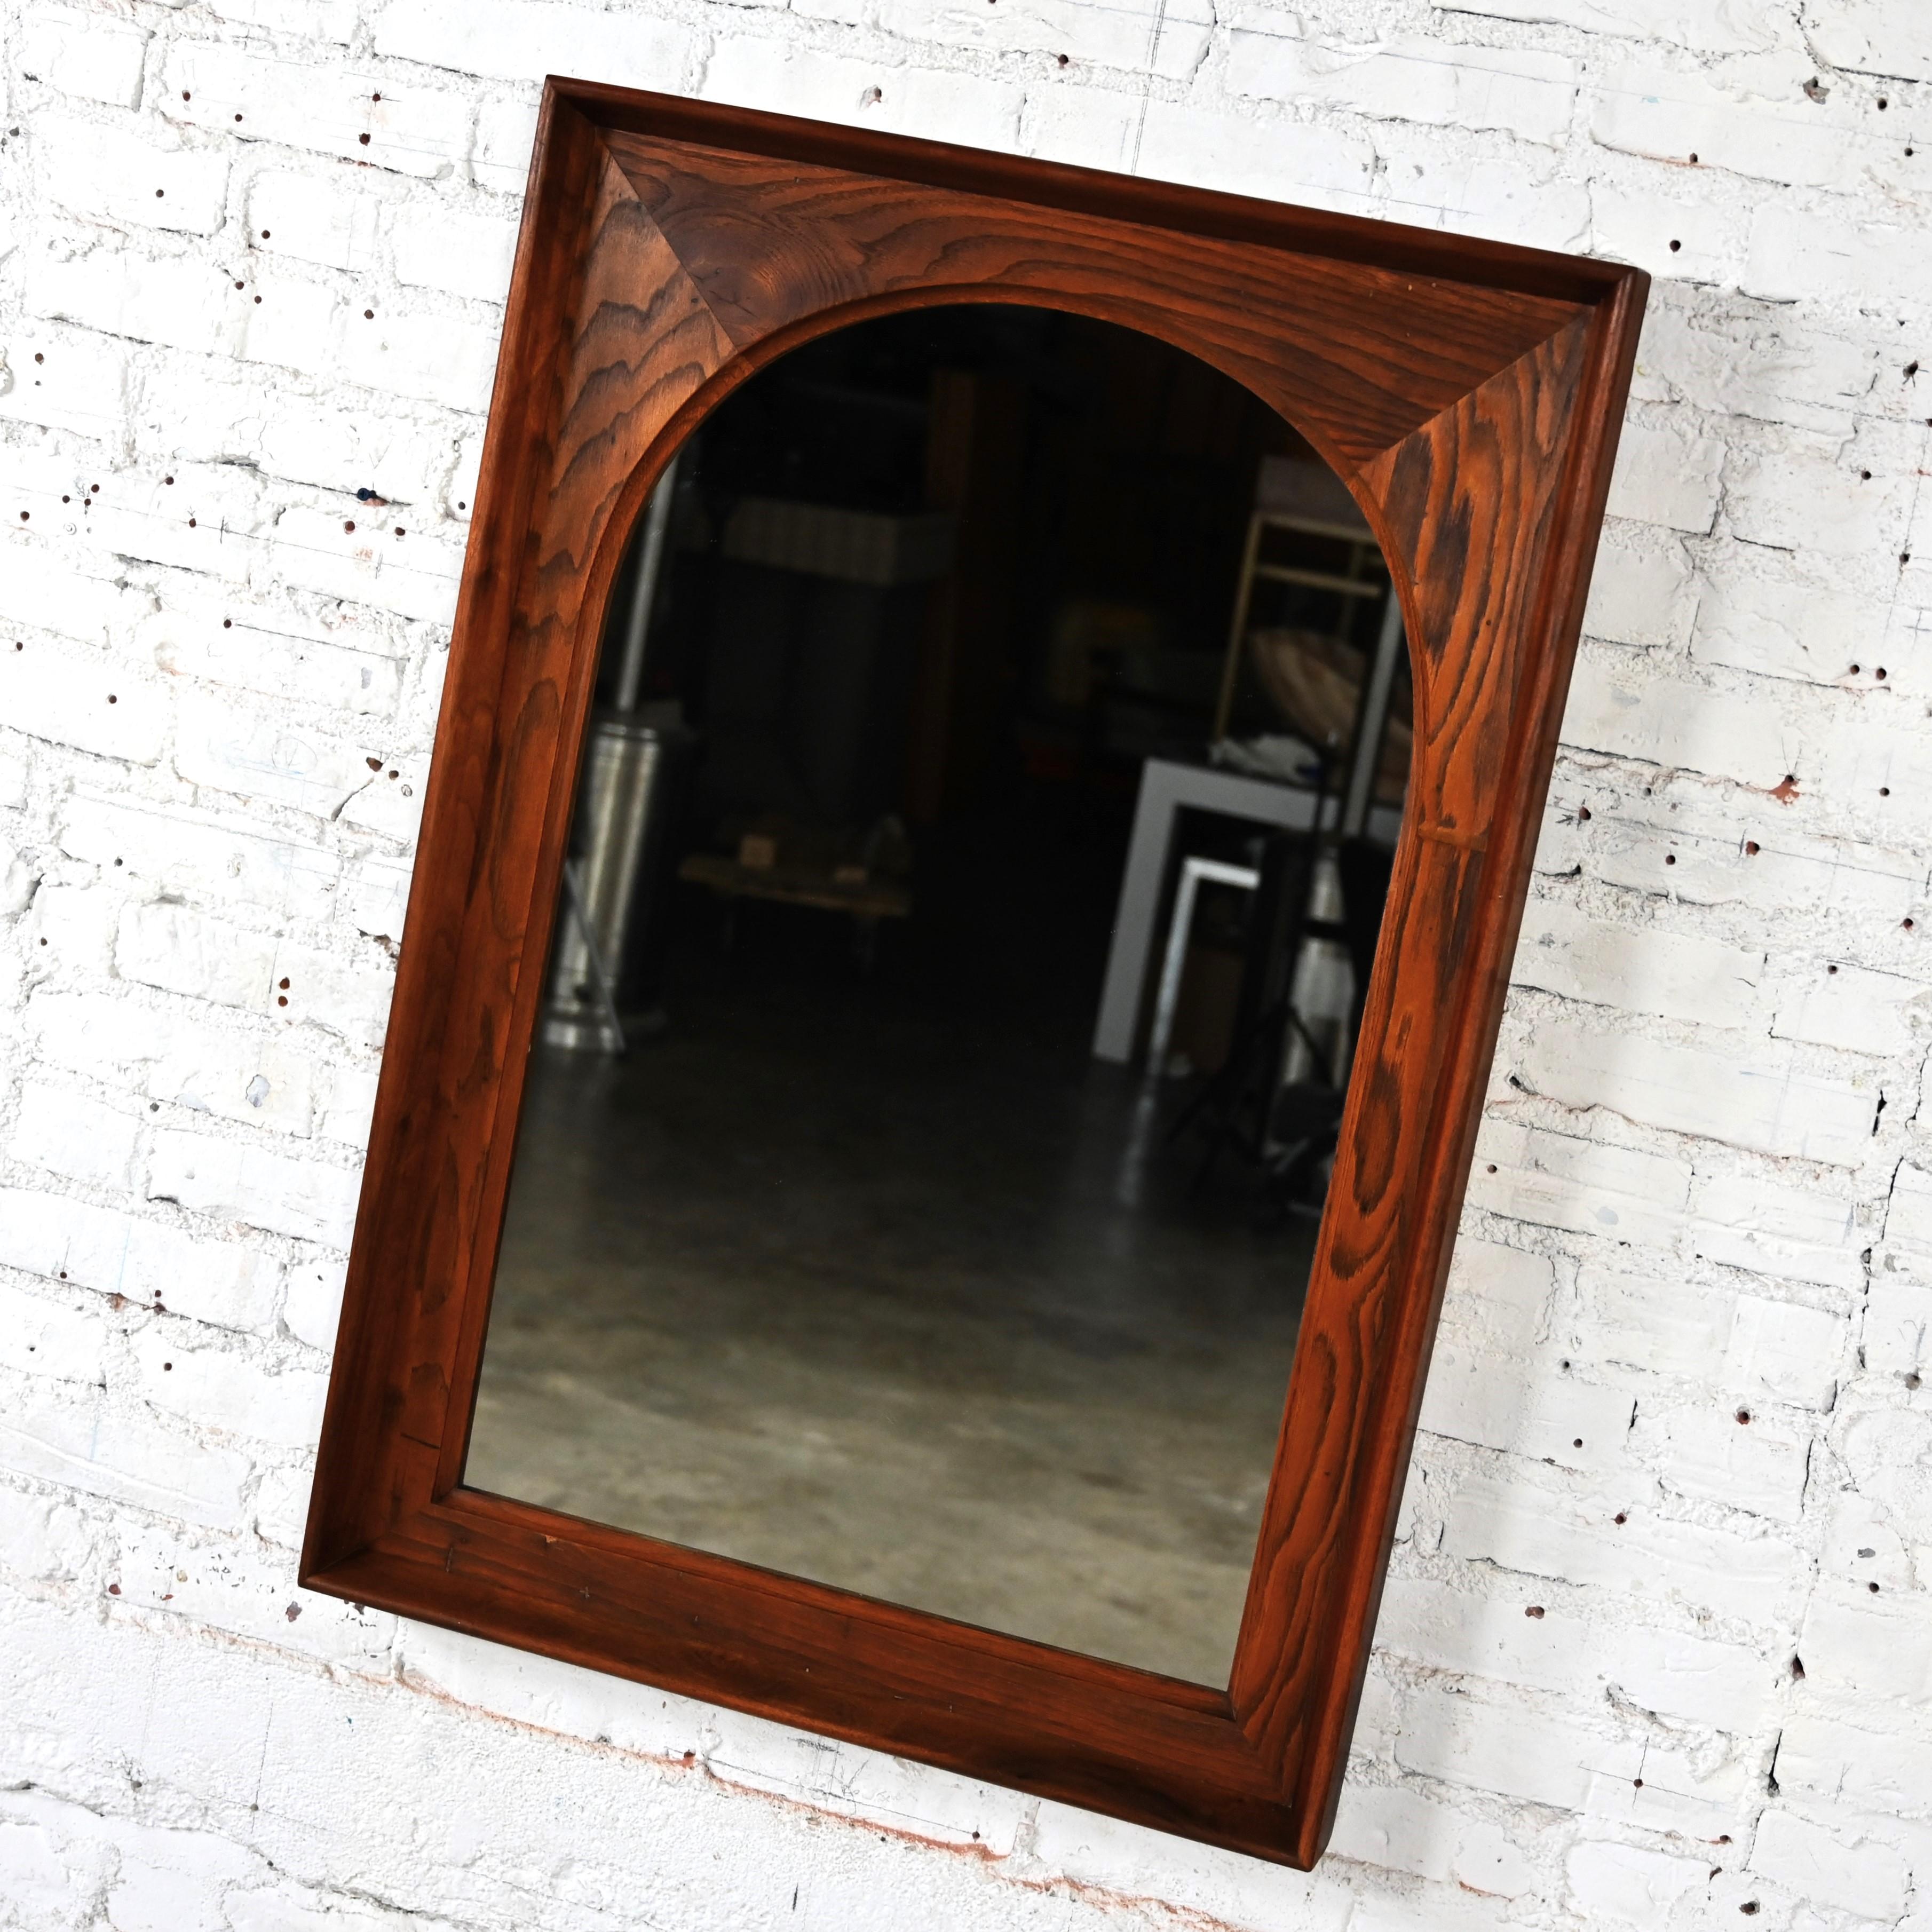 Lovely vintage Mid Century Modern framed arch mirror by Dillingham Manufacturing Company. Comprised of an arched mirror surrounded by a rustic pecky cypress with walnut trim. Beautiful condition, keeping in mind that this is vintage and not new so